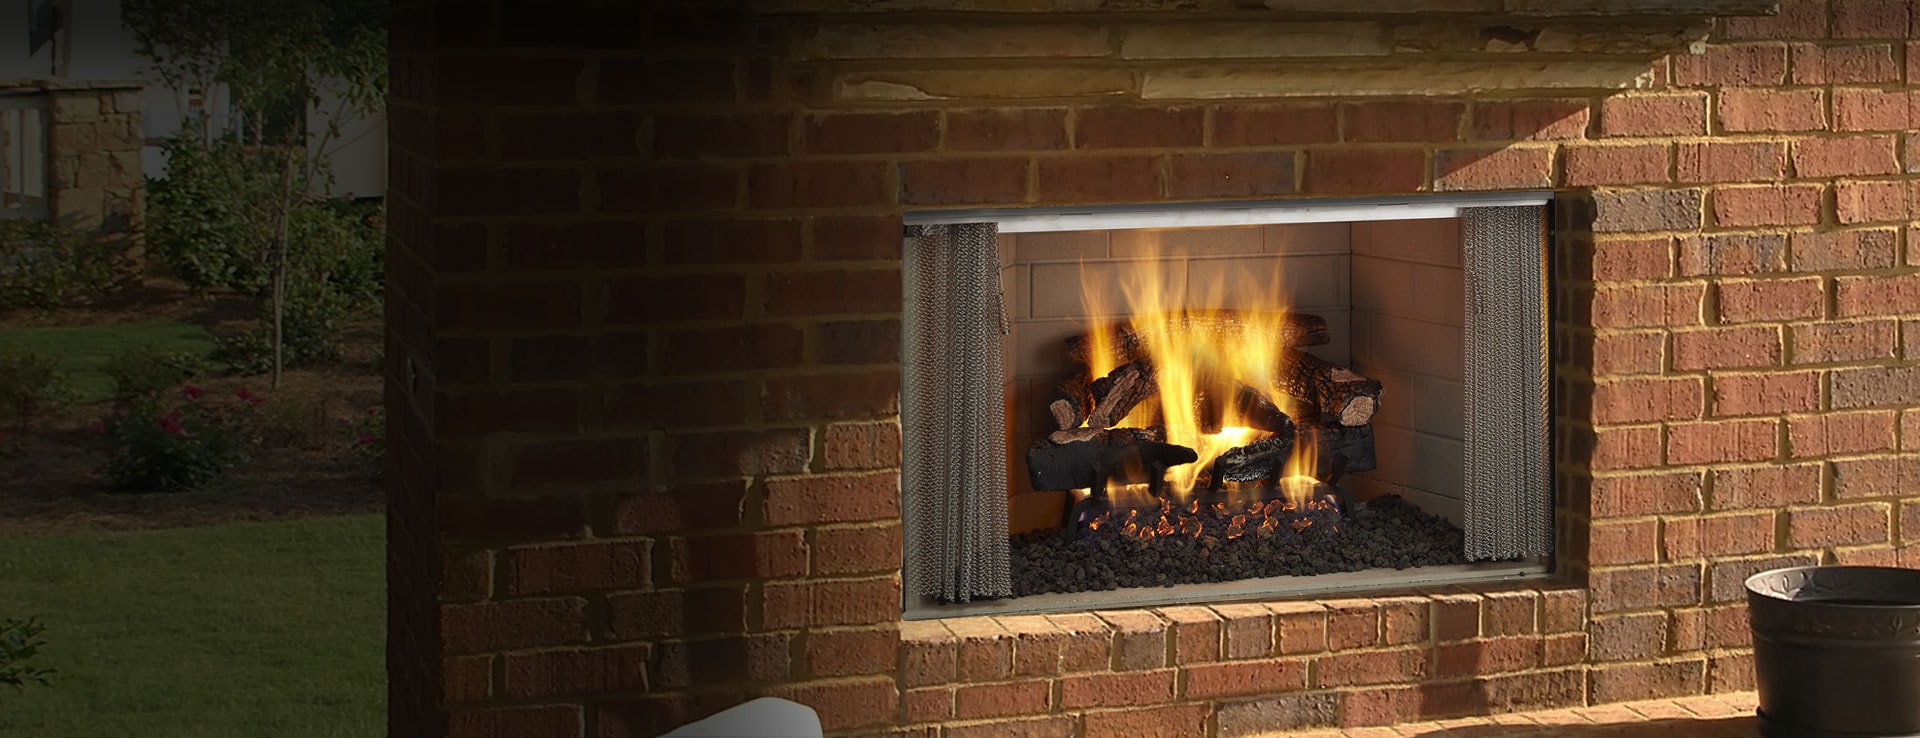 How to Build An Outdoor Brick Fireplace Elegant Villawood Outdoor Wood Fireplace